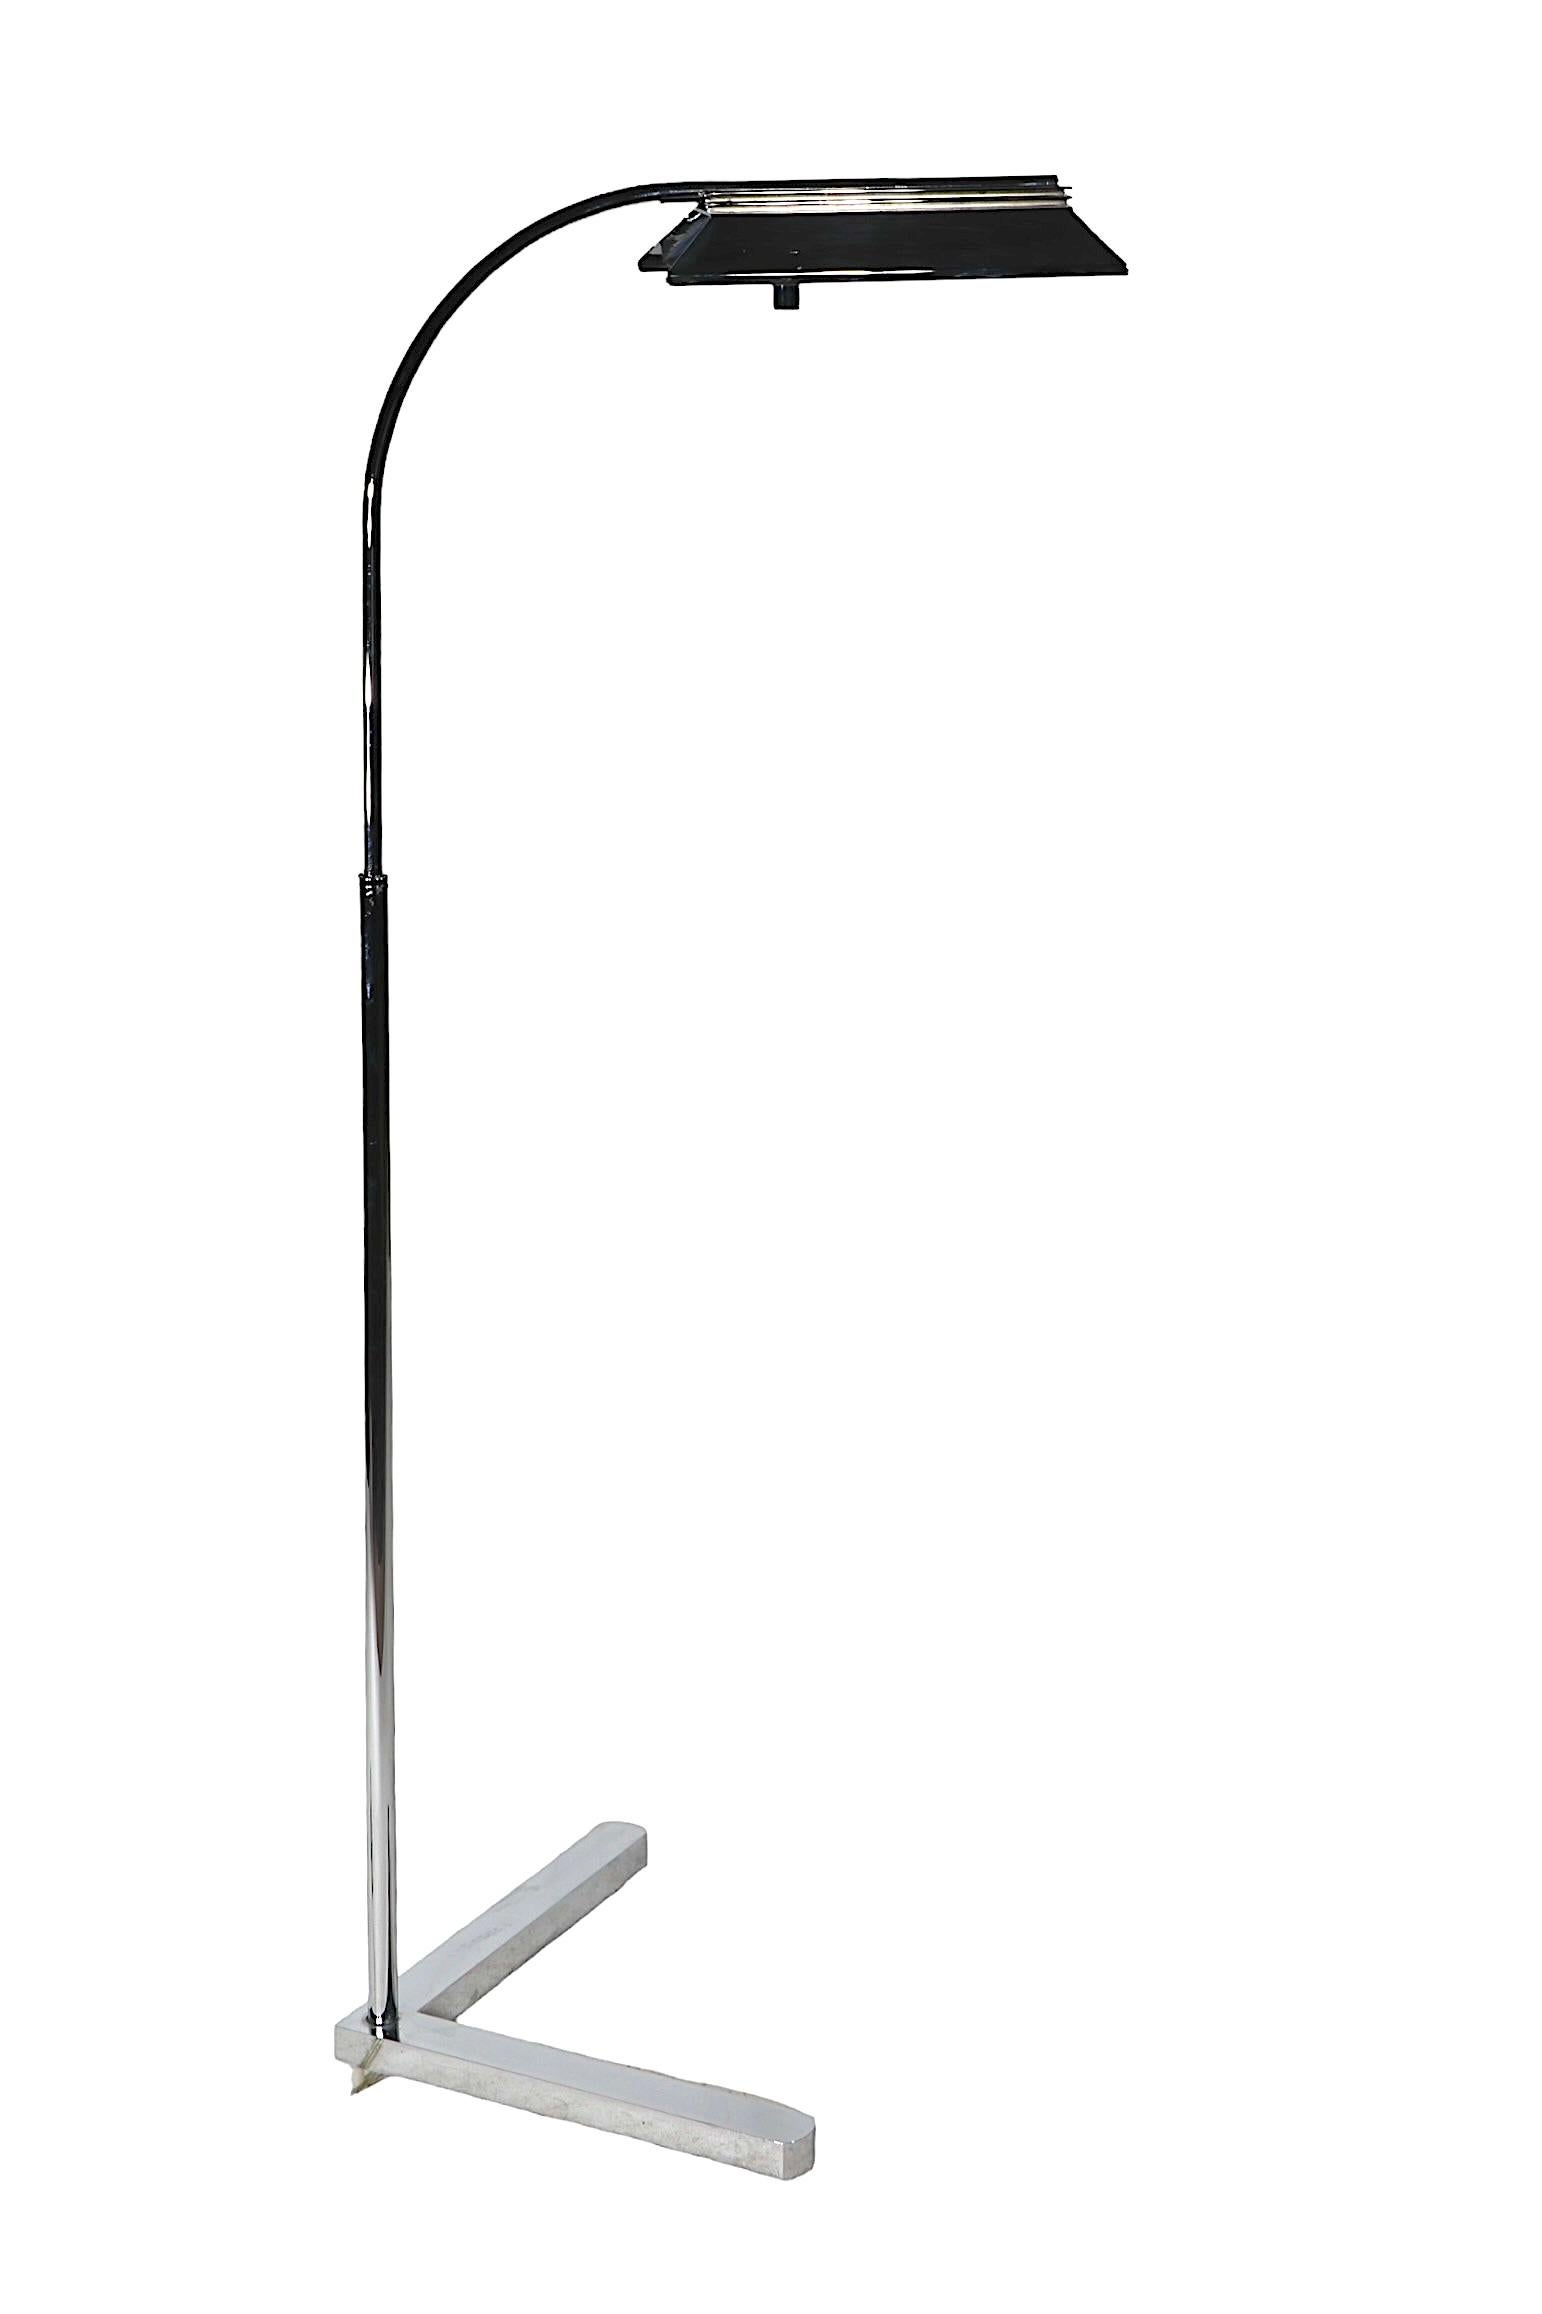 American Bright Chrome Adjustable Floor Reading Pharmacy Style Lamp by Casella C 1980's For Sale